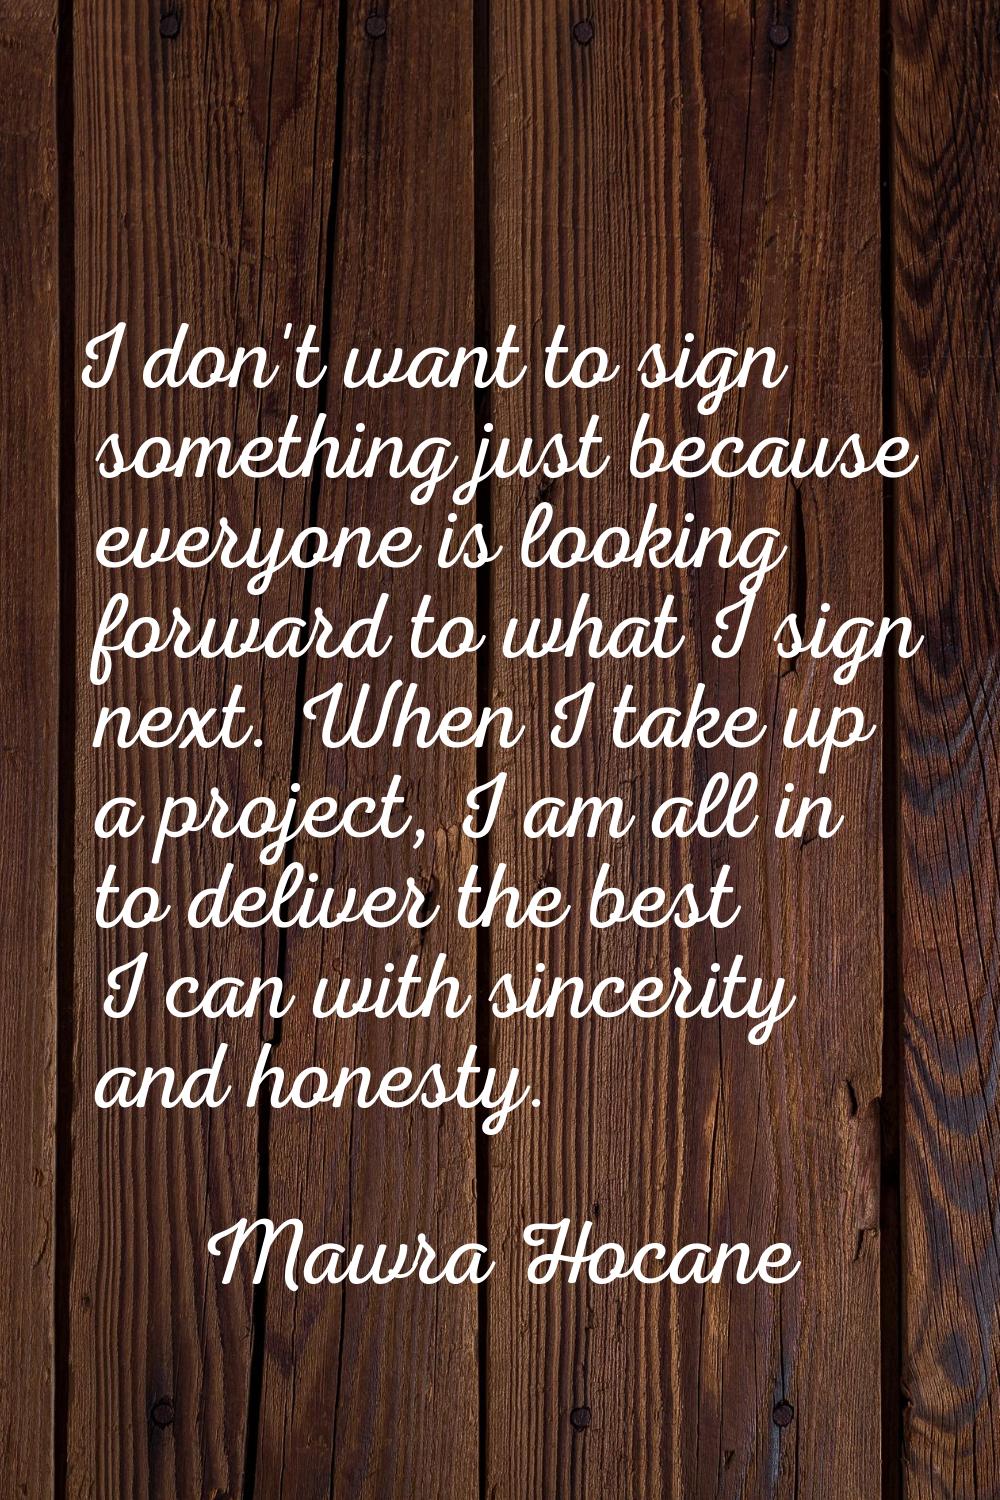 I don't want to sign something just because everyone is looking forward to what I sign next. When I